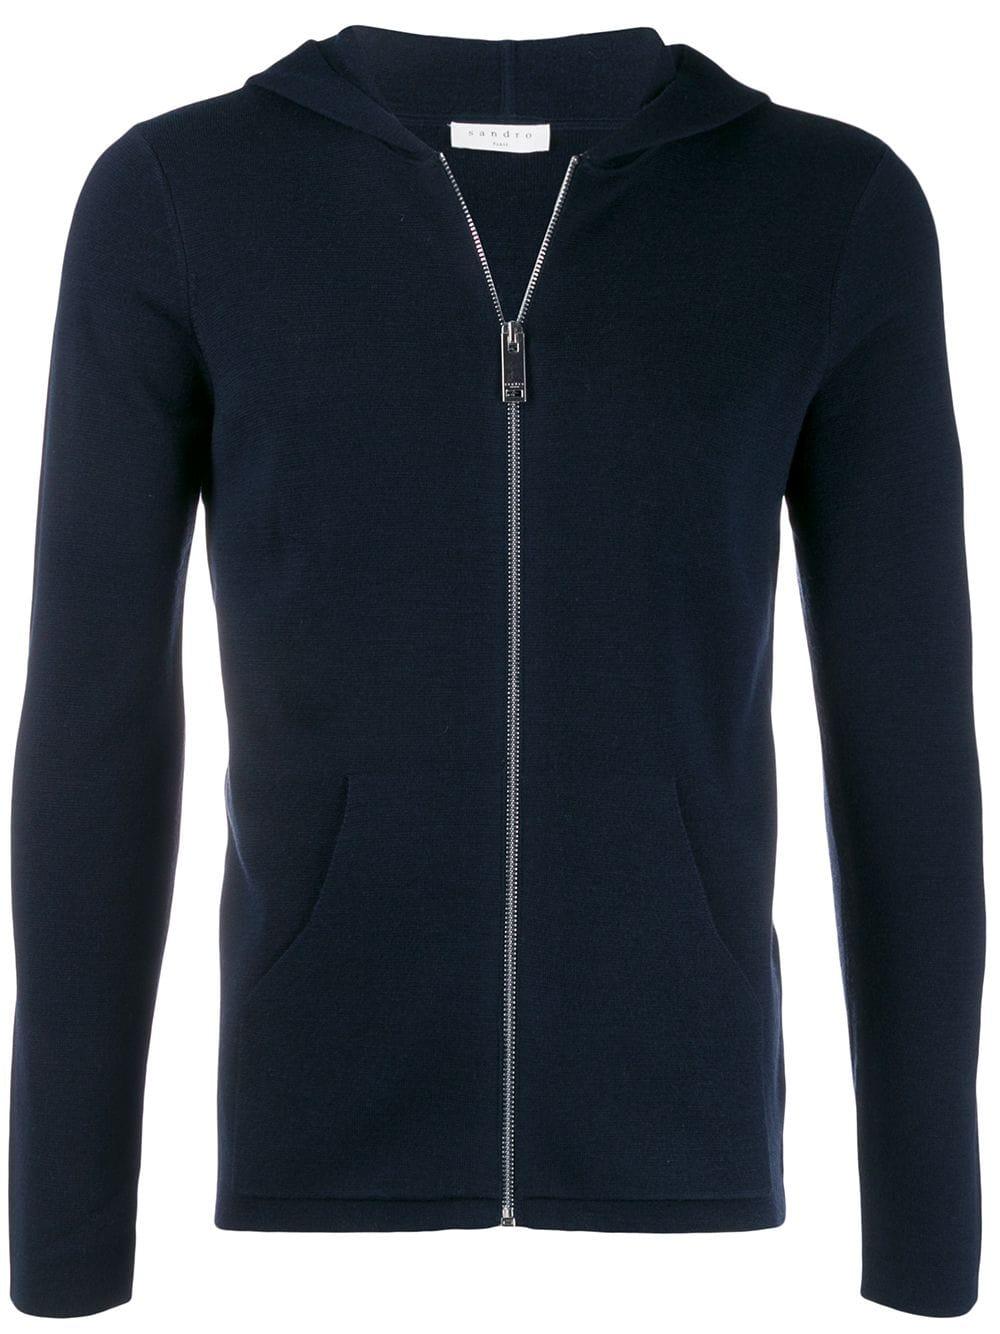 Sandro Wool Zipped Up Cardigan in Blue for Men - Lyst